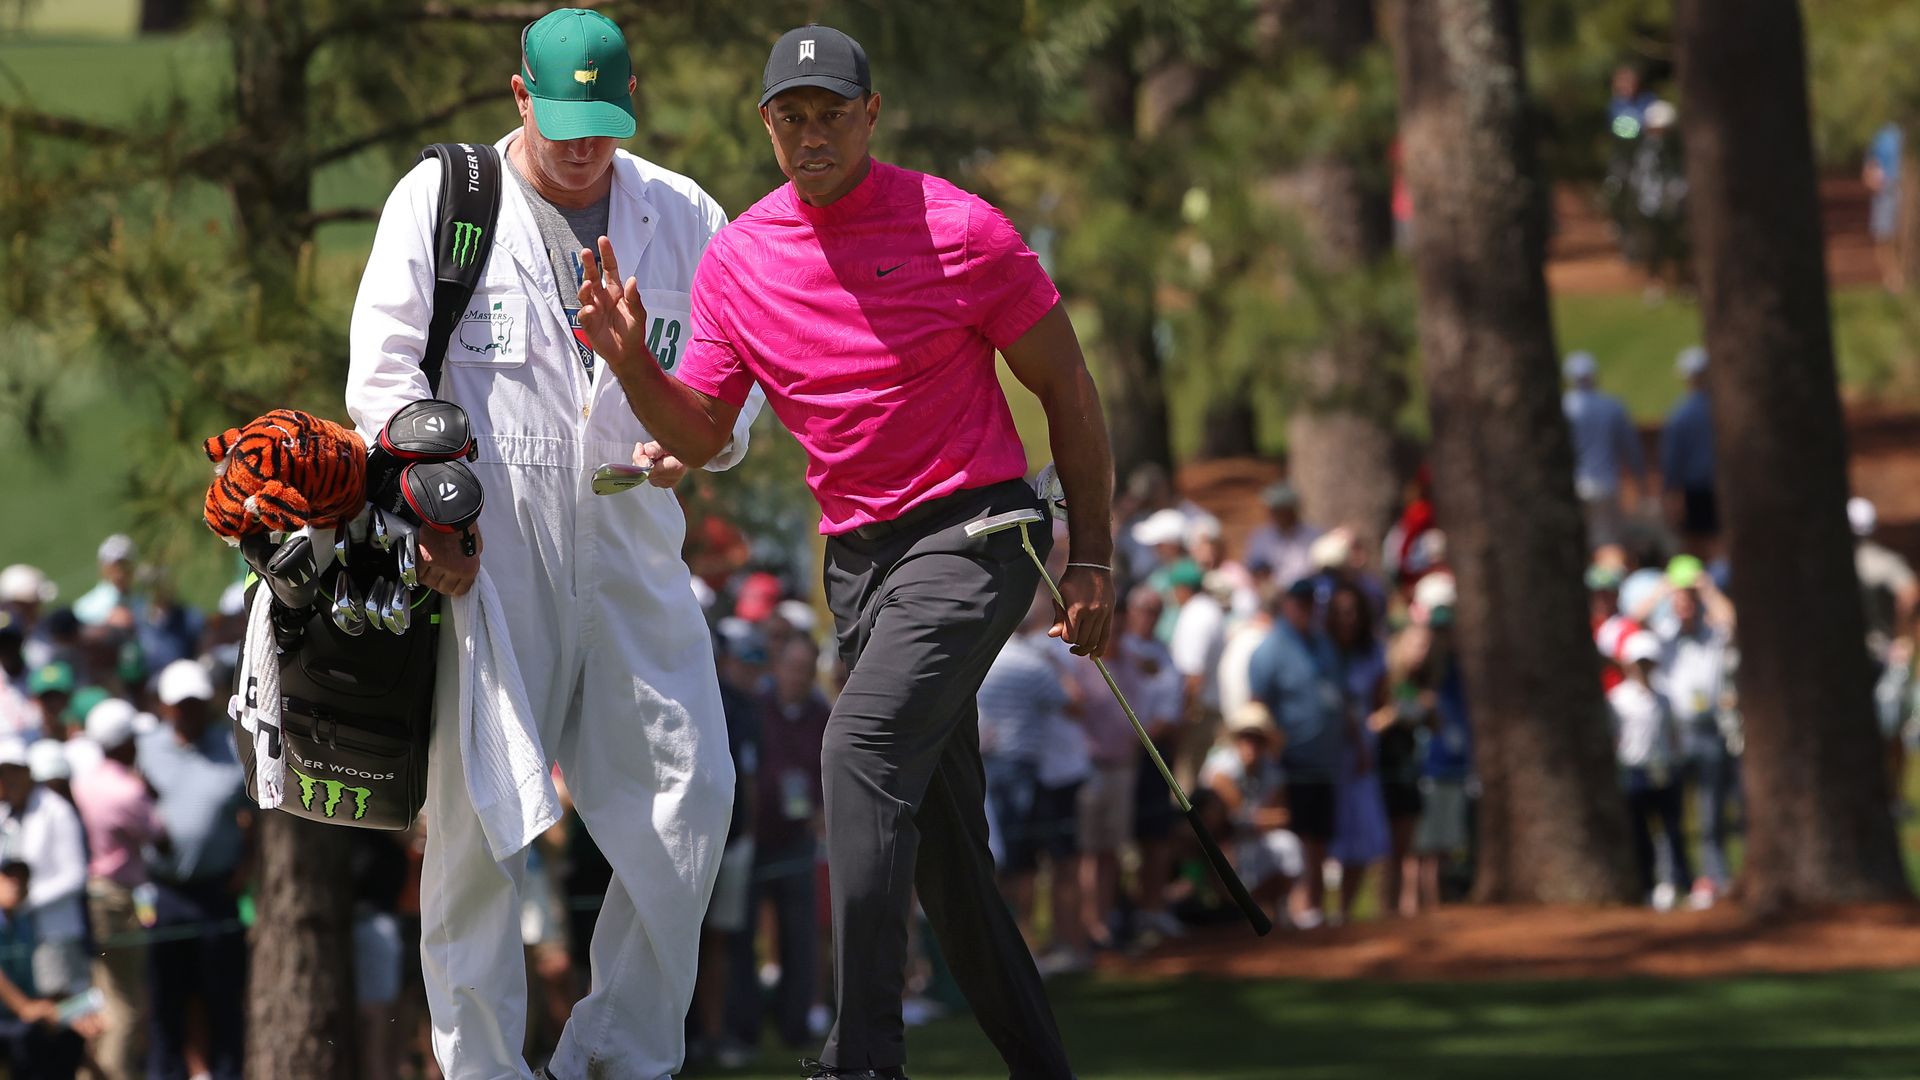 A golfer in a pink shirt waves to the crowd with his caddie, in a white jumpsuit, behind him